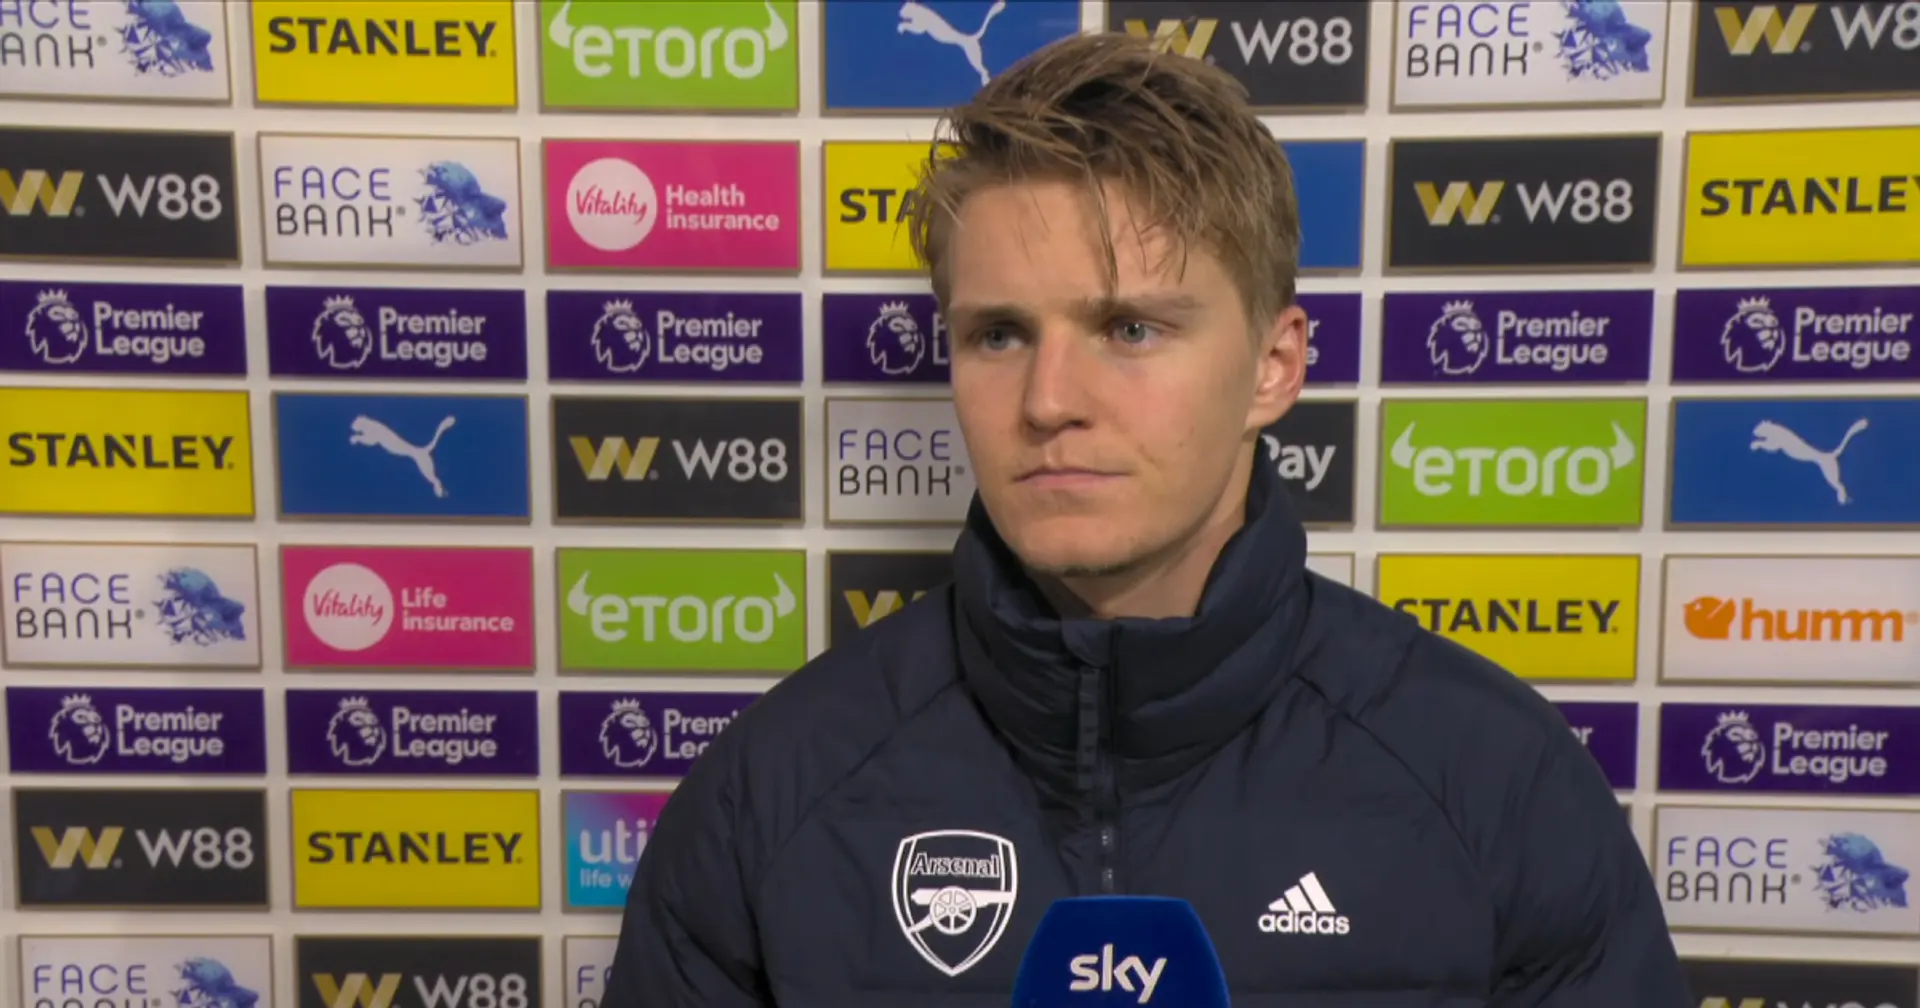 Odegaard on Wolves win: 'We have to come back even stronger and better'